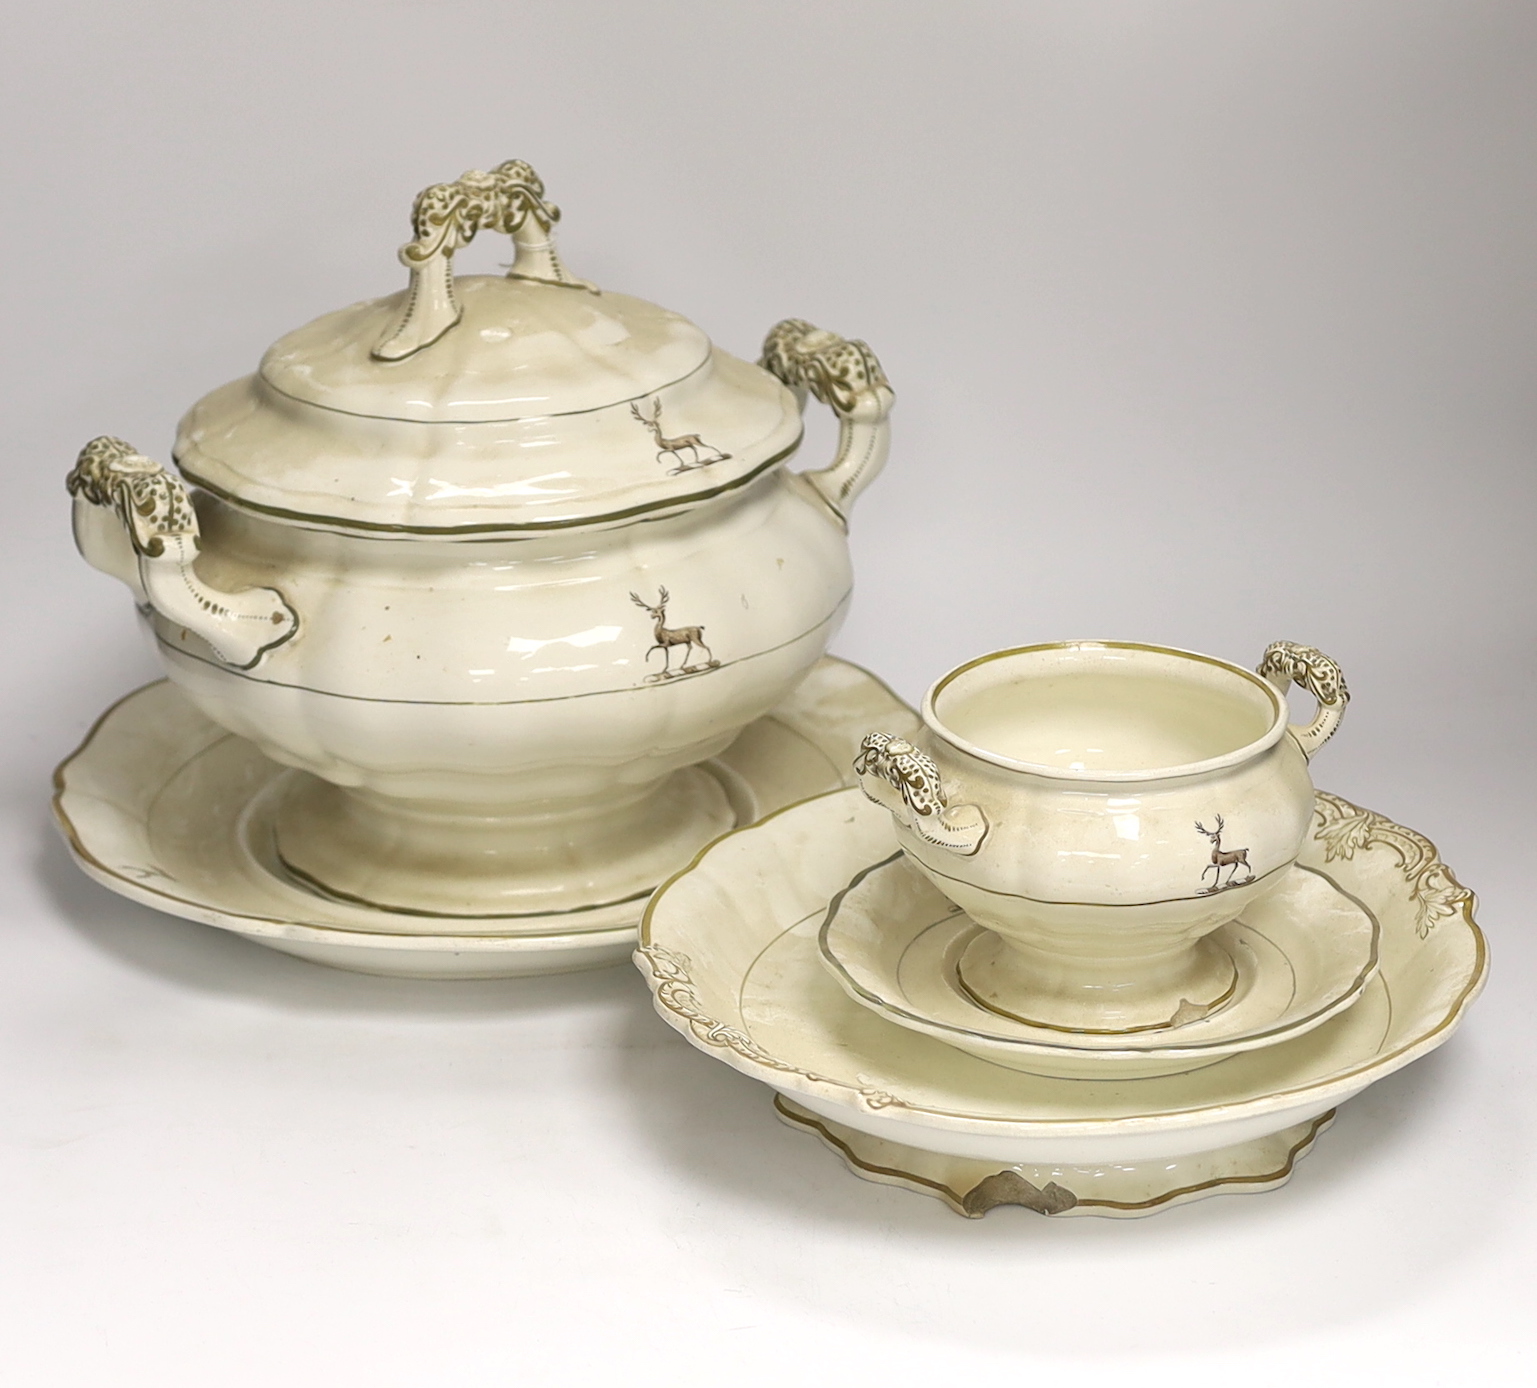 Copeland late Spode crested part dinner set comprising tureen and stand, bowl and stand and two